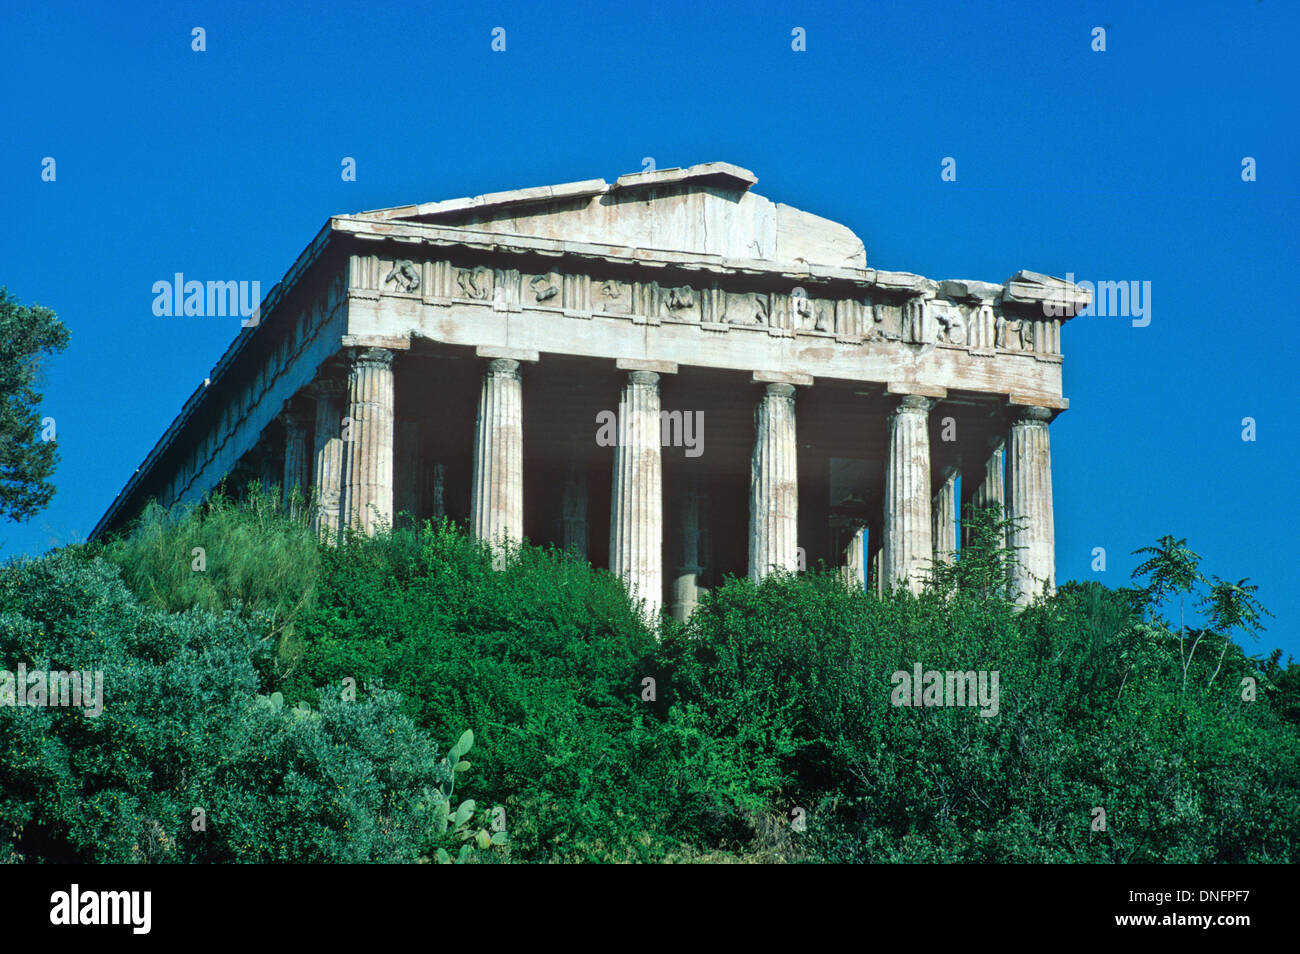 Greek Doric Temple of Hephaestus or Hephaisteion, formerly the Theseion or Temple of Theseus, Ancient Agora, Athens, Greece Stock Photo